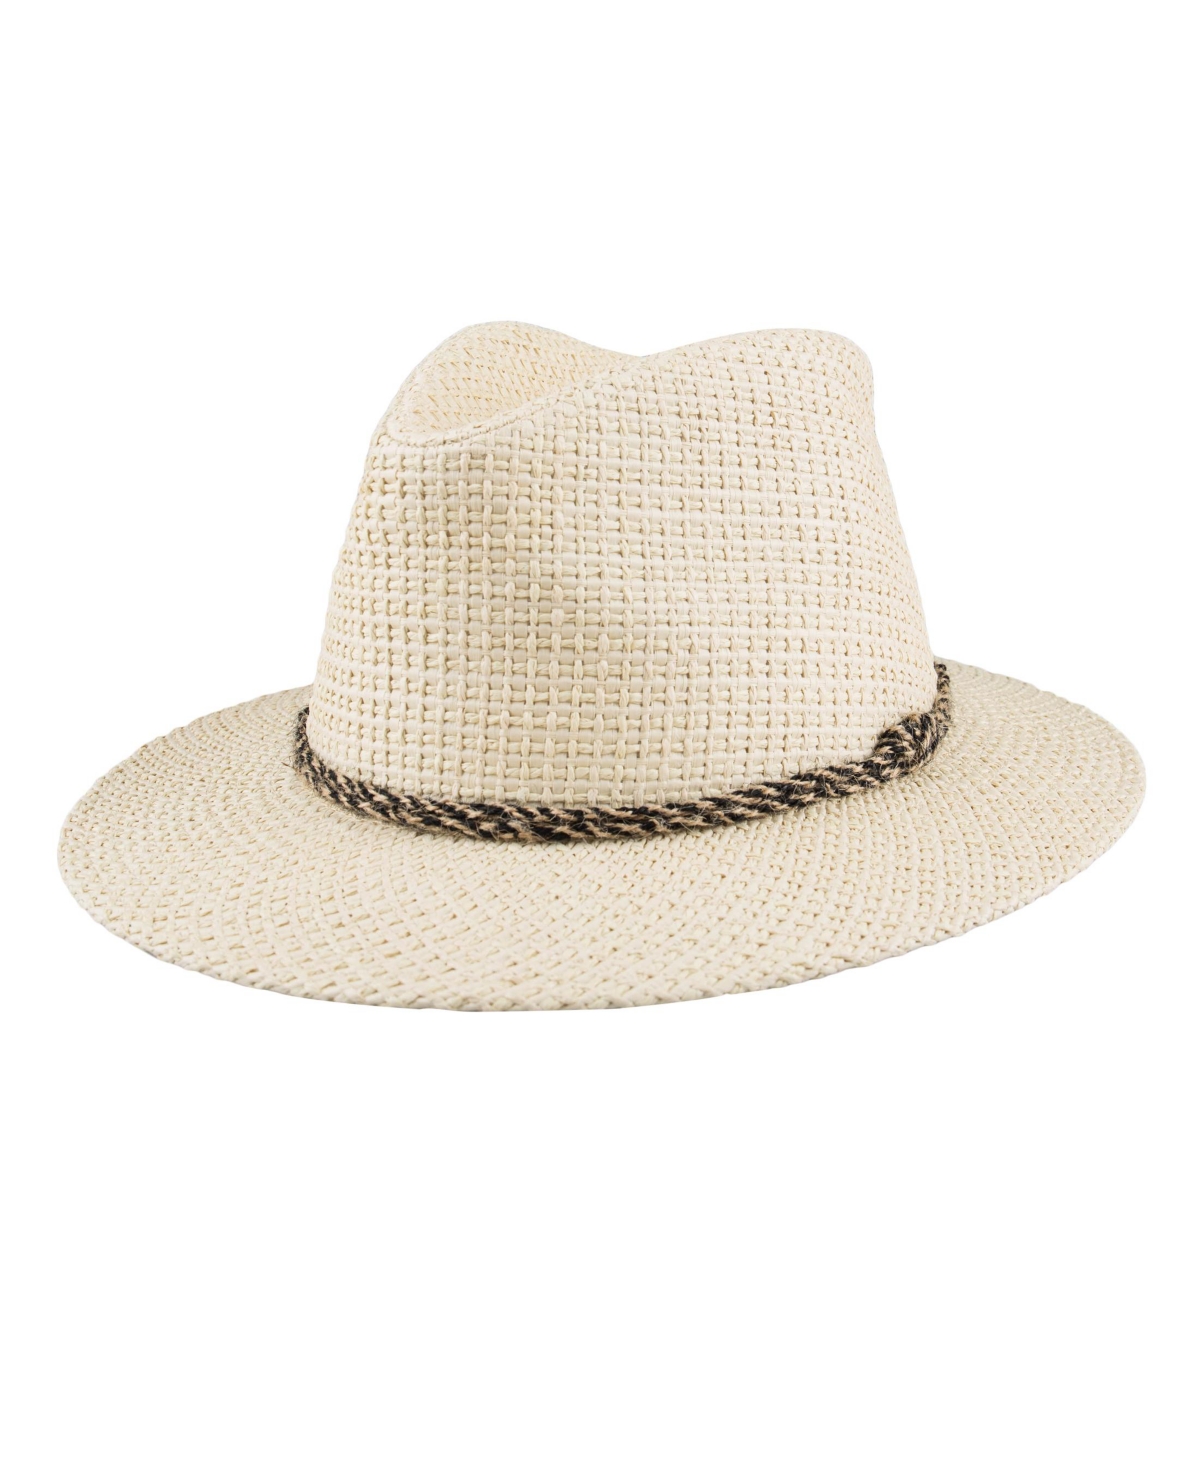 Levi's Men's Classic Panama Hat With Twisted Band In Natural